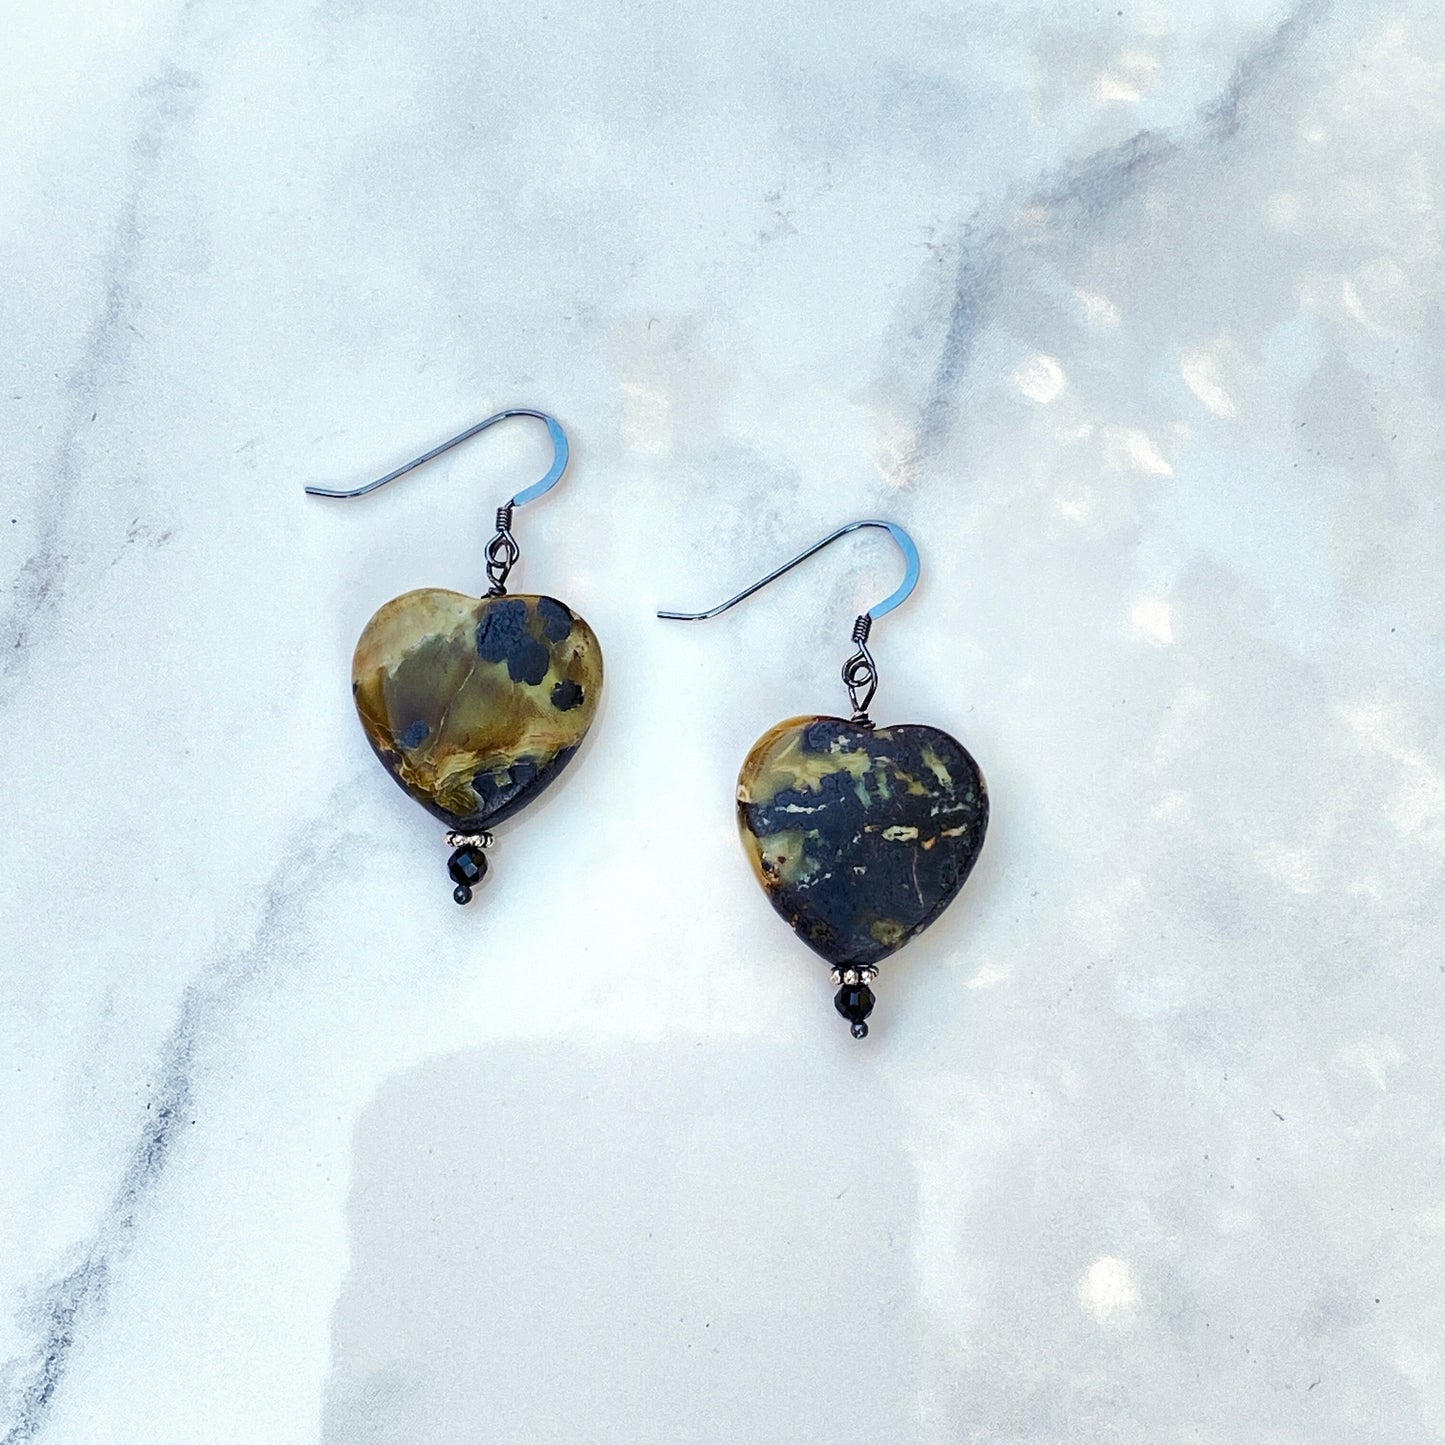 Yellow Turquoise Gemstone Hearts and Oxidized Sterling Silver Drop Earrings